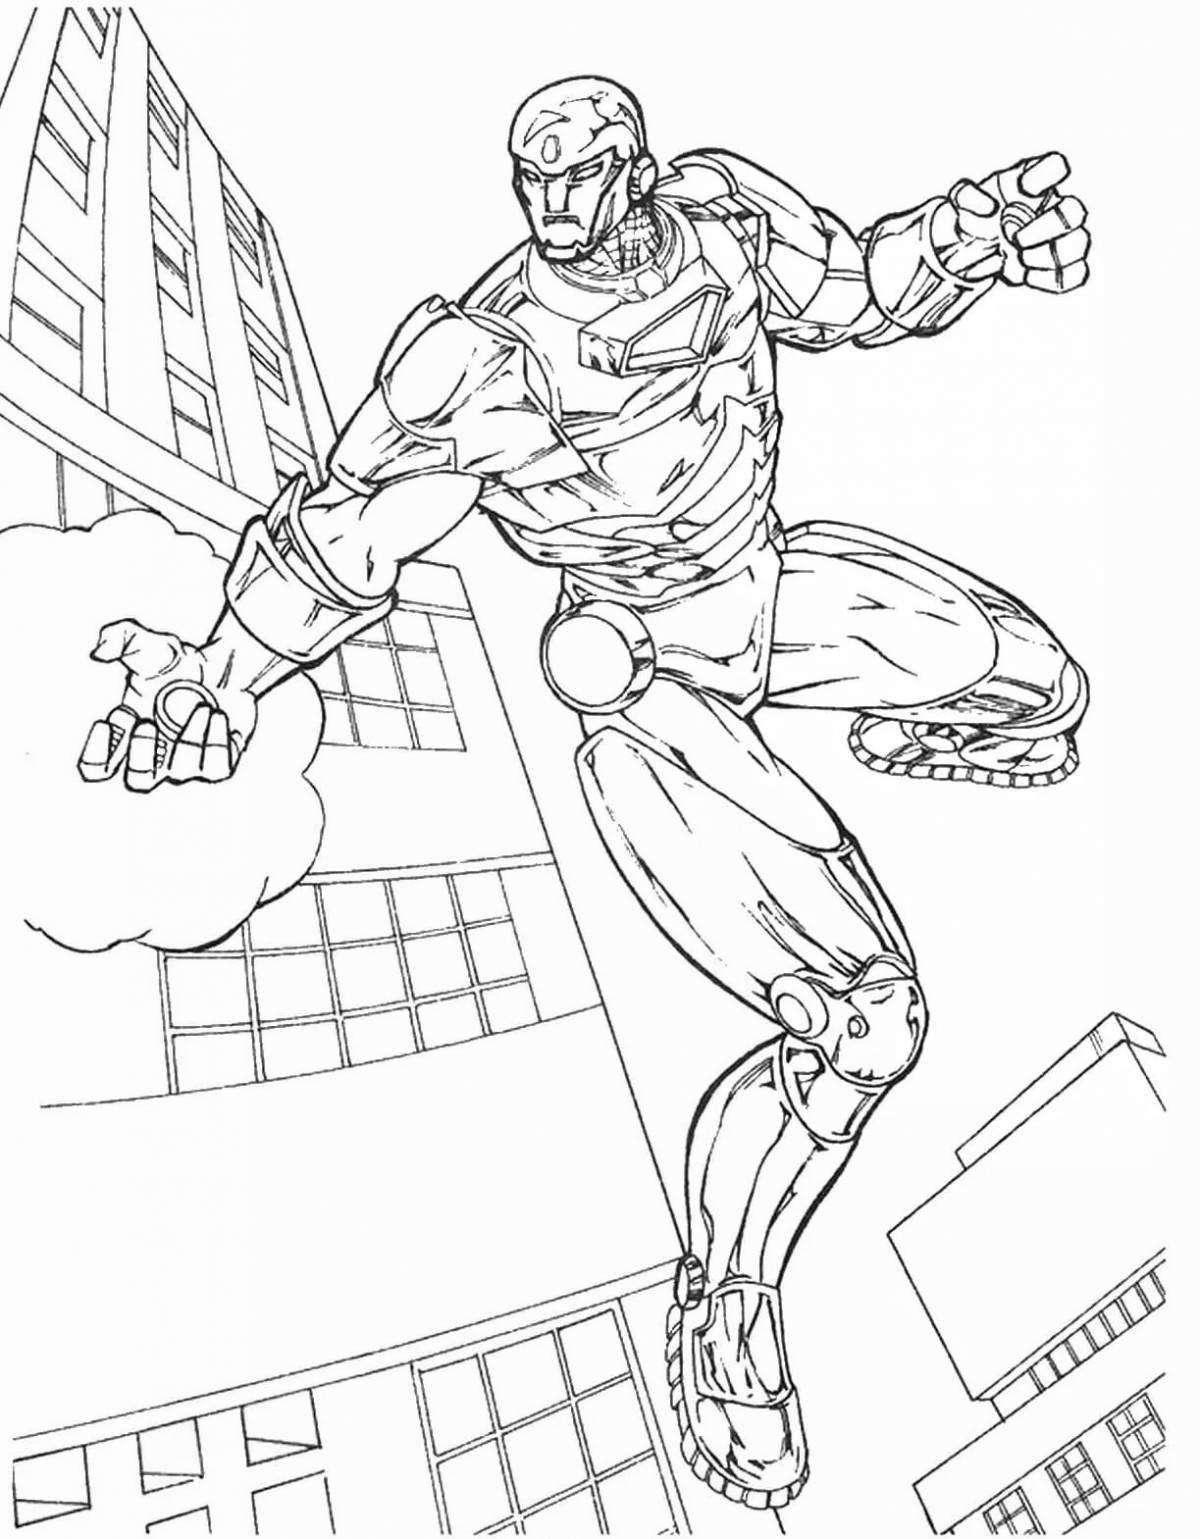 Brave spiderman and iron man coloring pages for kids